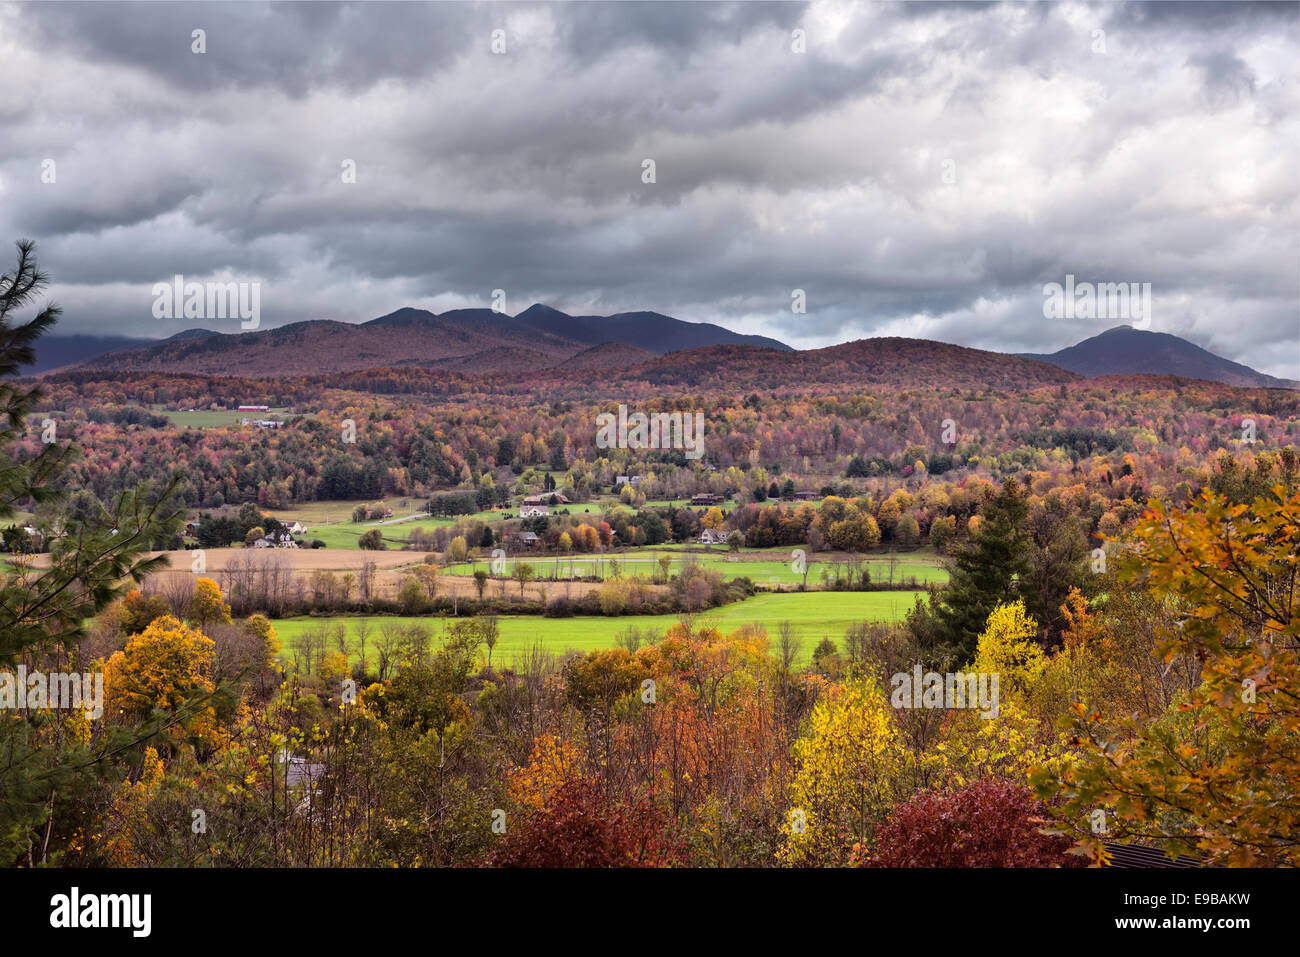 View of Stowe valley and Sterling Range from Brush Hill Vermont USA in Autumn with red and yellow leaves on trees Stock Photo